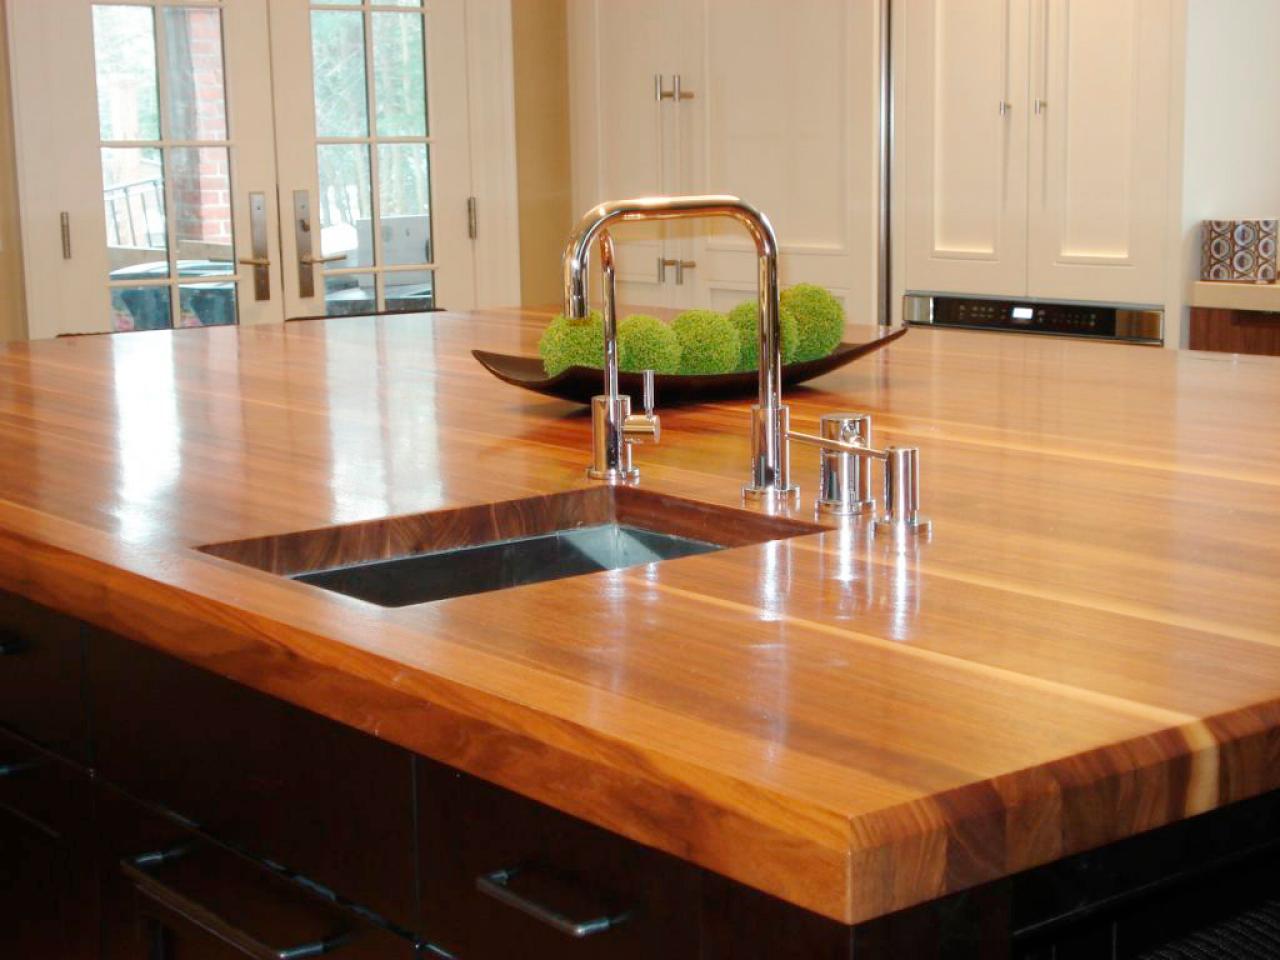 Butcher Block And Wood Countertops, How To Build A Wooden Kitchen Countertop